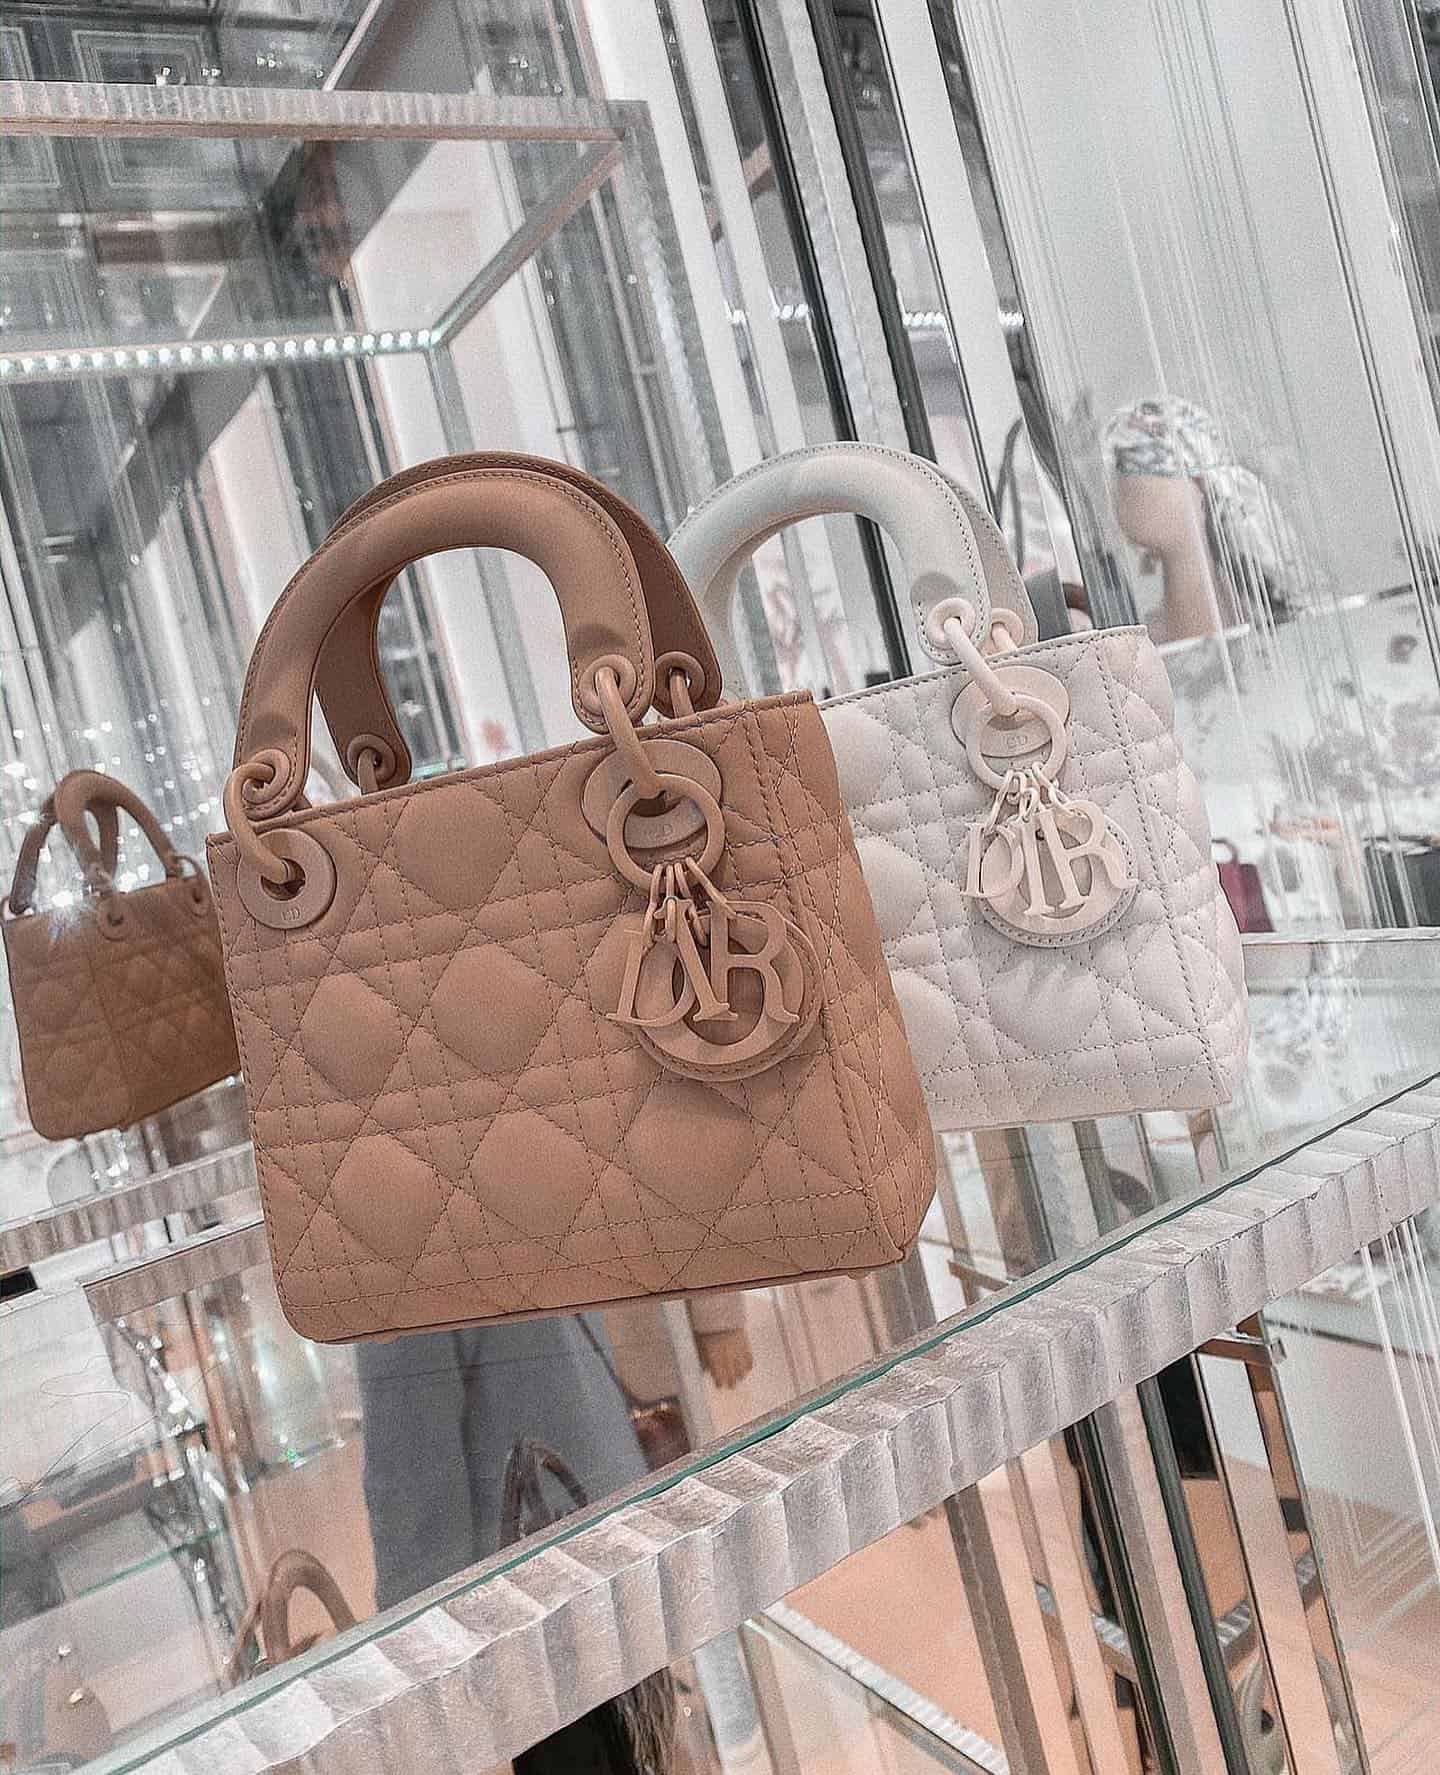 Why the Lady Dior bag is popular